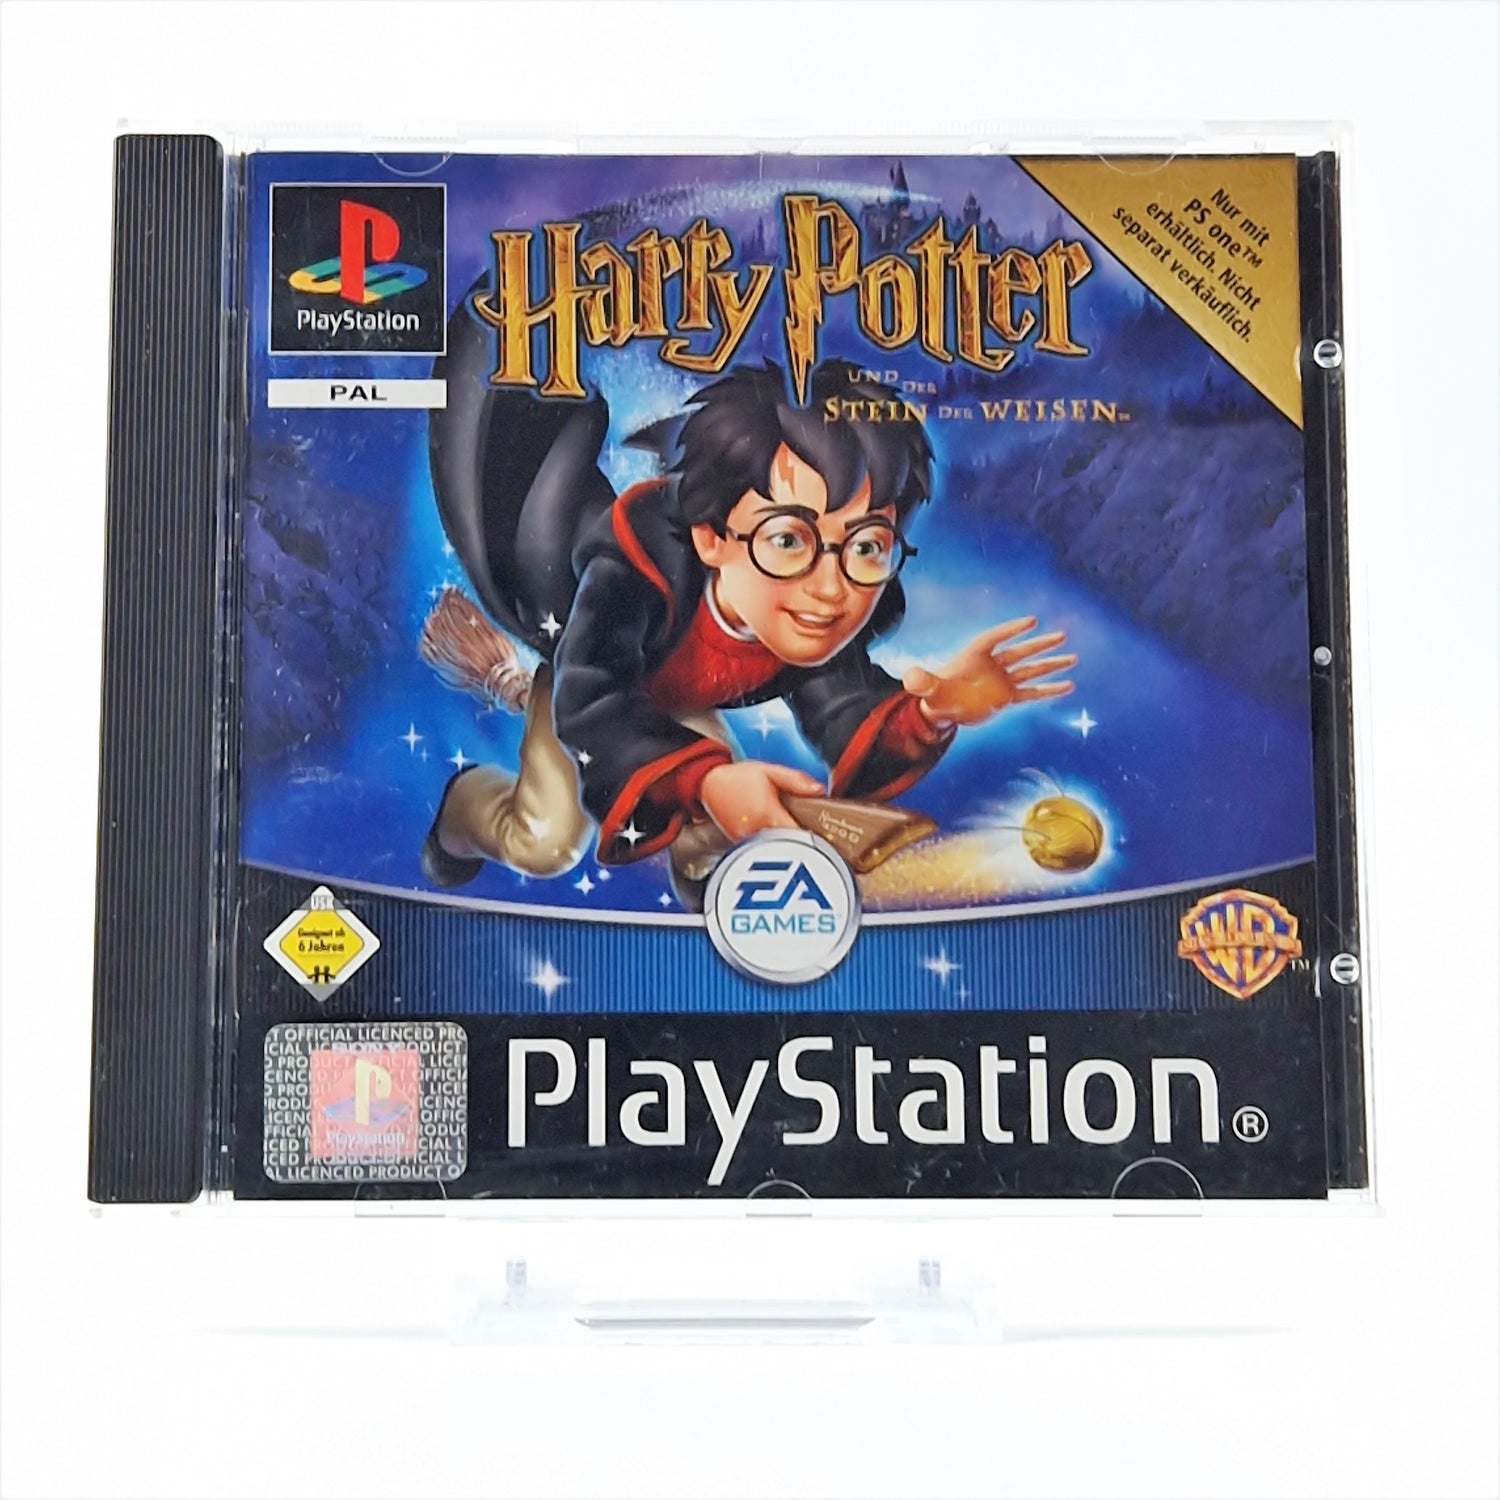 Playstation 1 Game: Harry Potter and the Wise Man - PSOne Bundle Version PS1